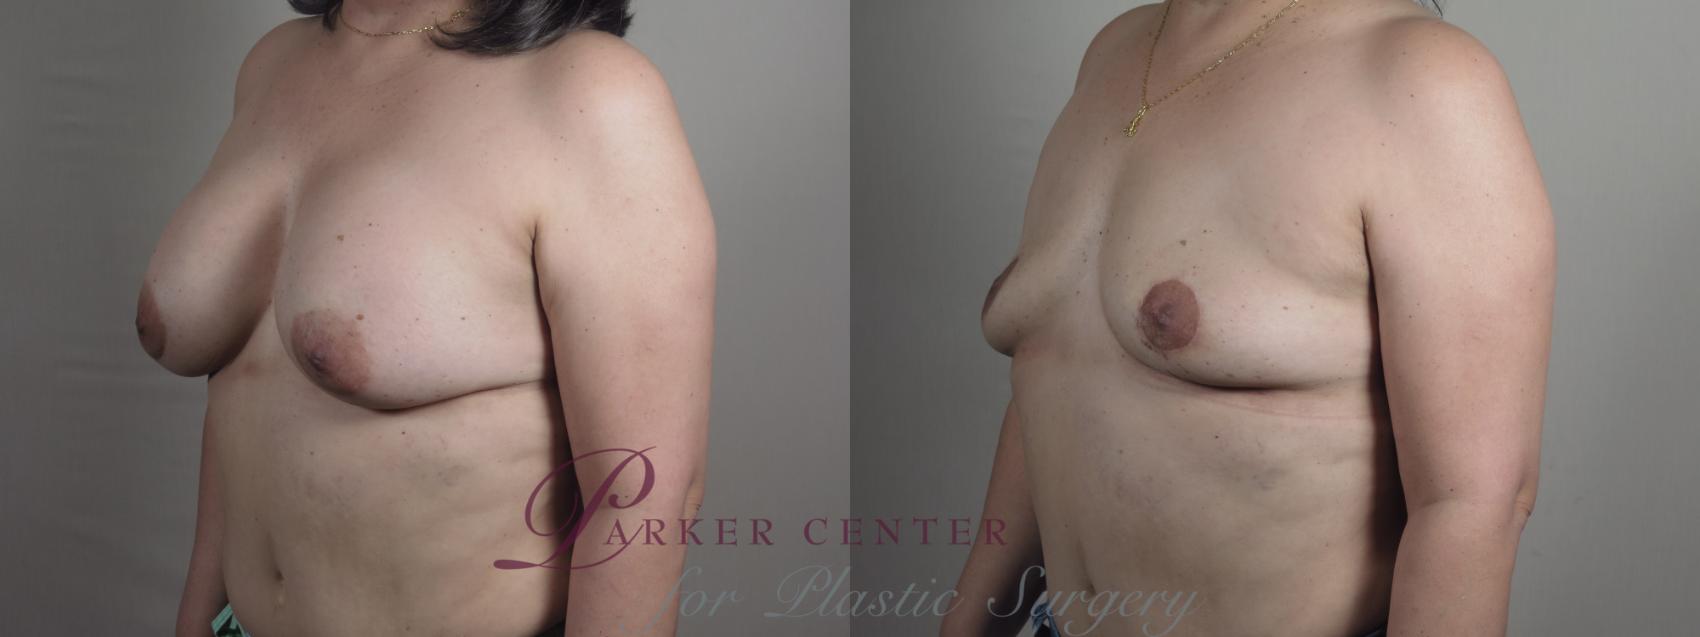 Breast Implant Removal Case 1196 Before & After View #2 | Paramus, NJ | Parker Center for Plastic Surgery